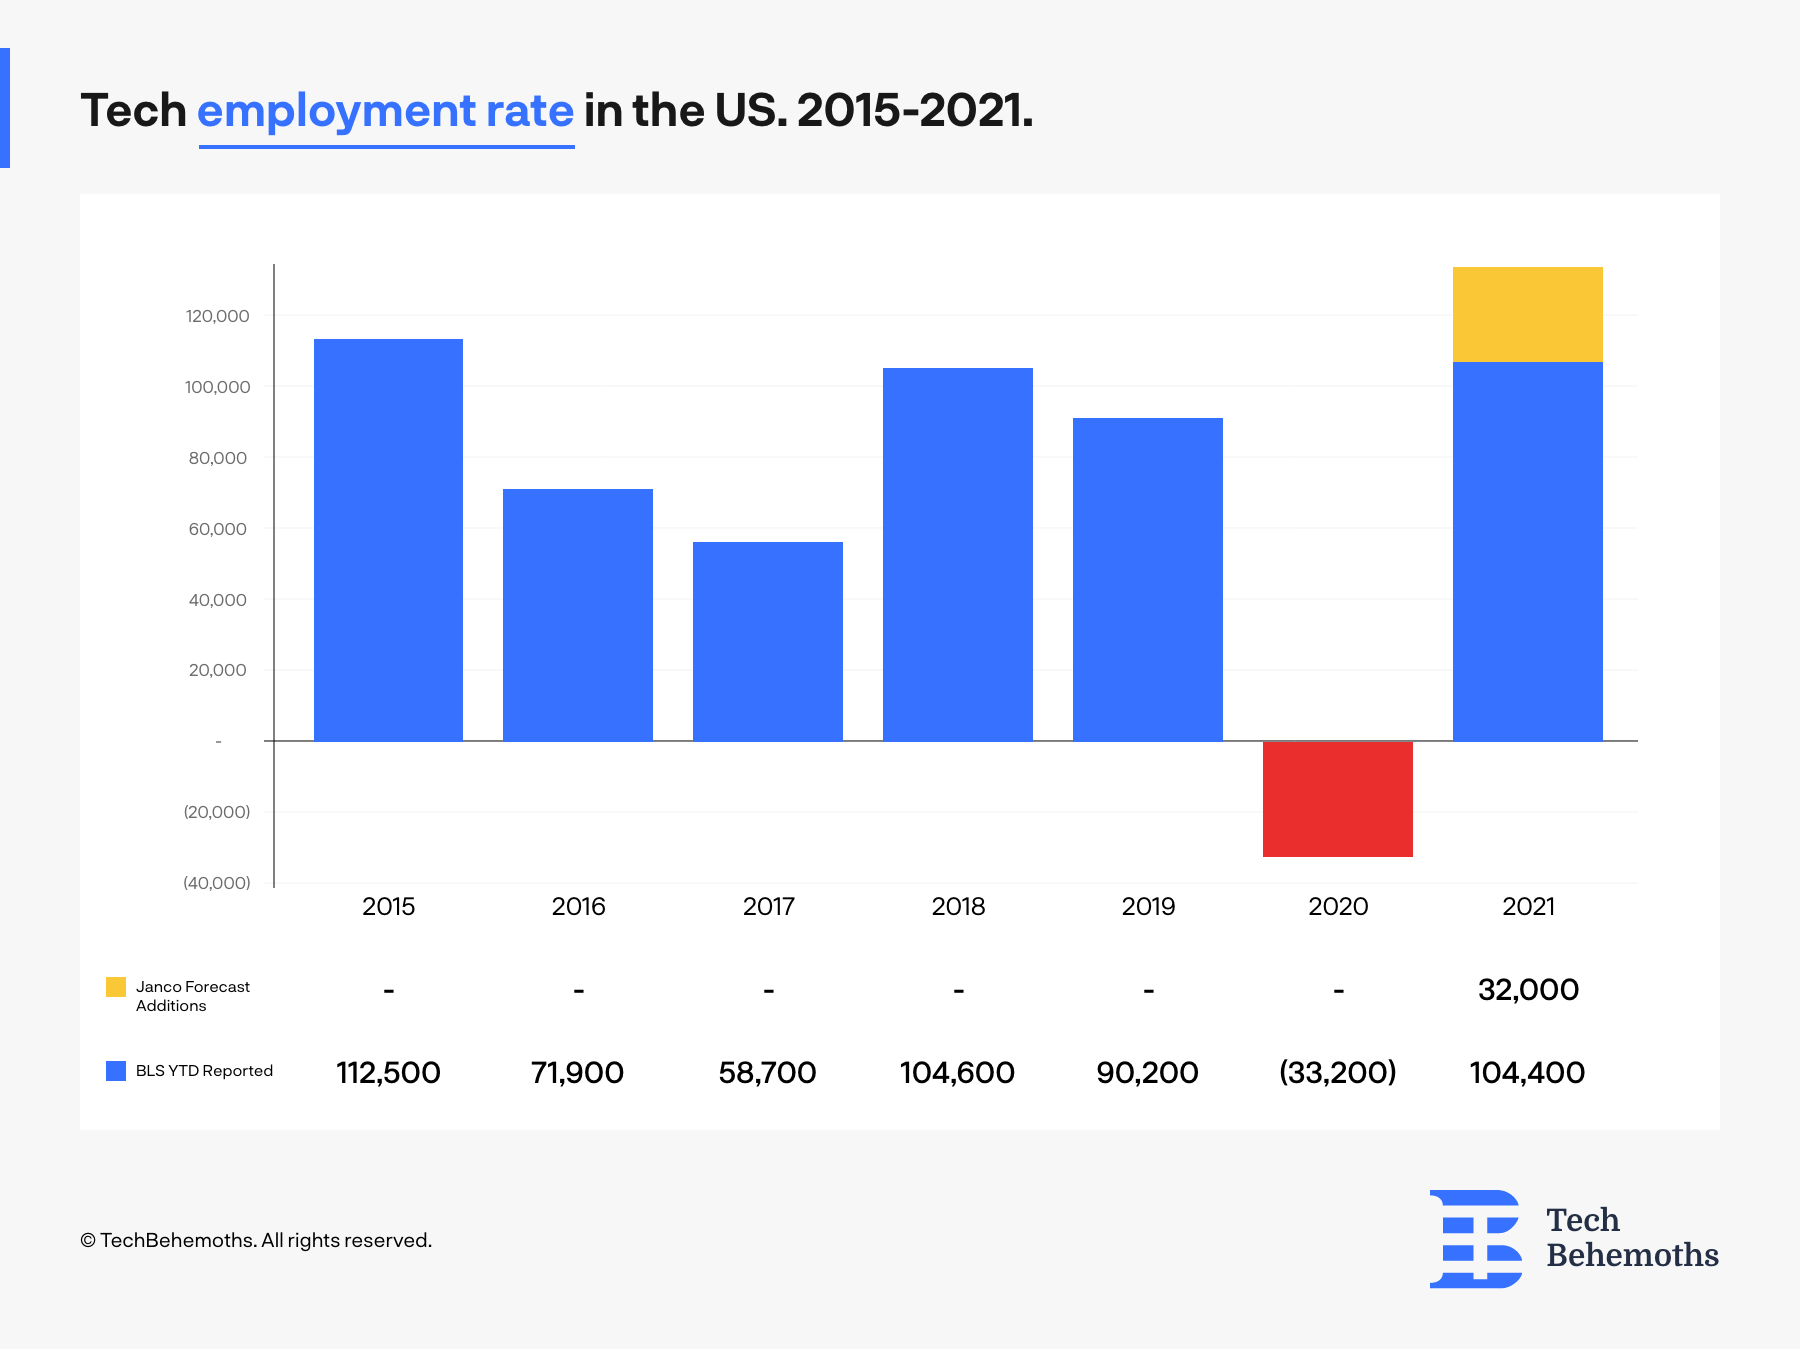 The US tech employment rate in 2021 increased and recovered all losses from the big employment depression in tech in 2020